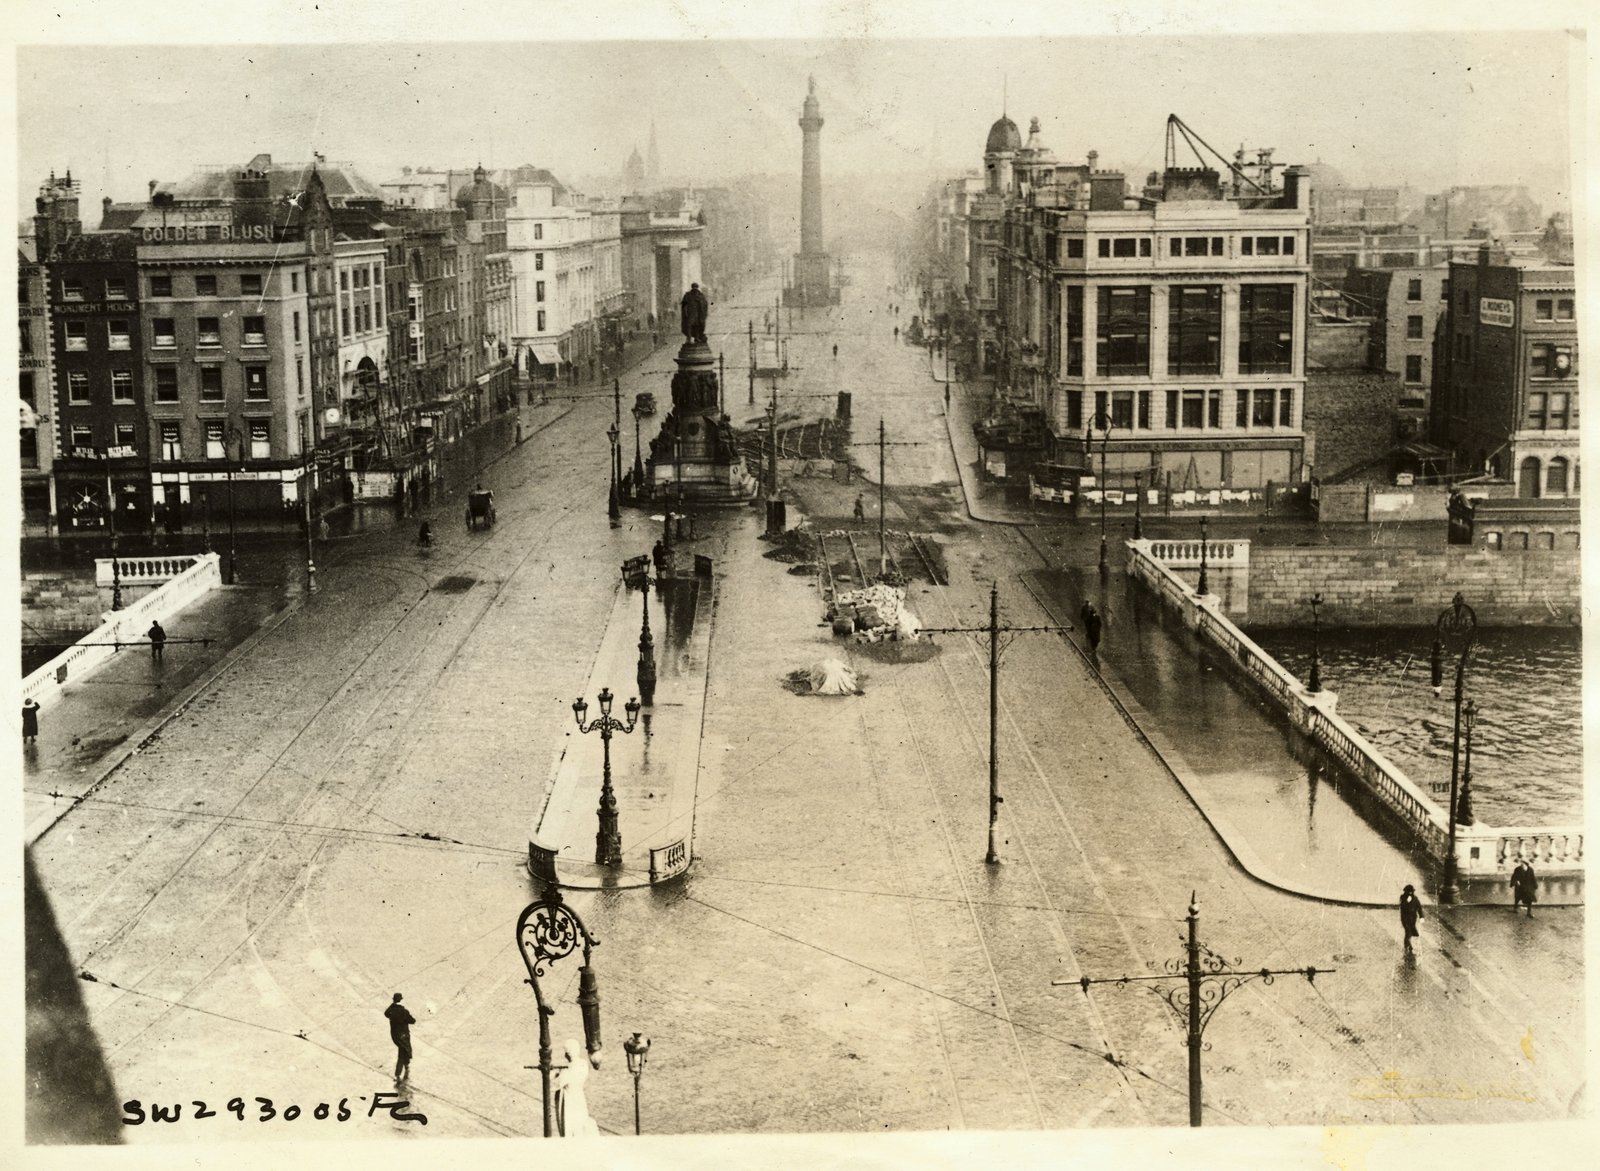 Image - BEFORE THE STORM: O'Connell/Sackville Street photographed a few months before the Civil War, still being repaired after 1916 (Credit: Getty Images)